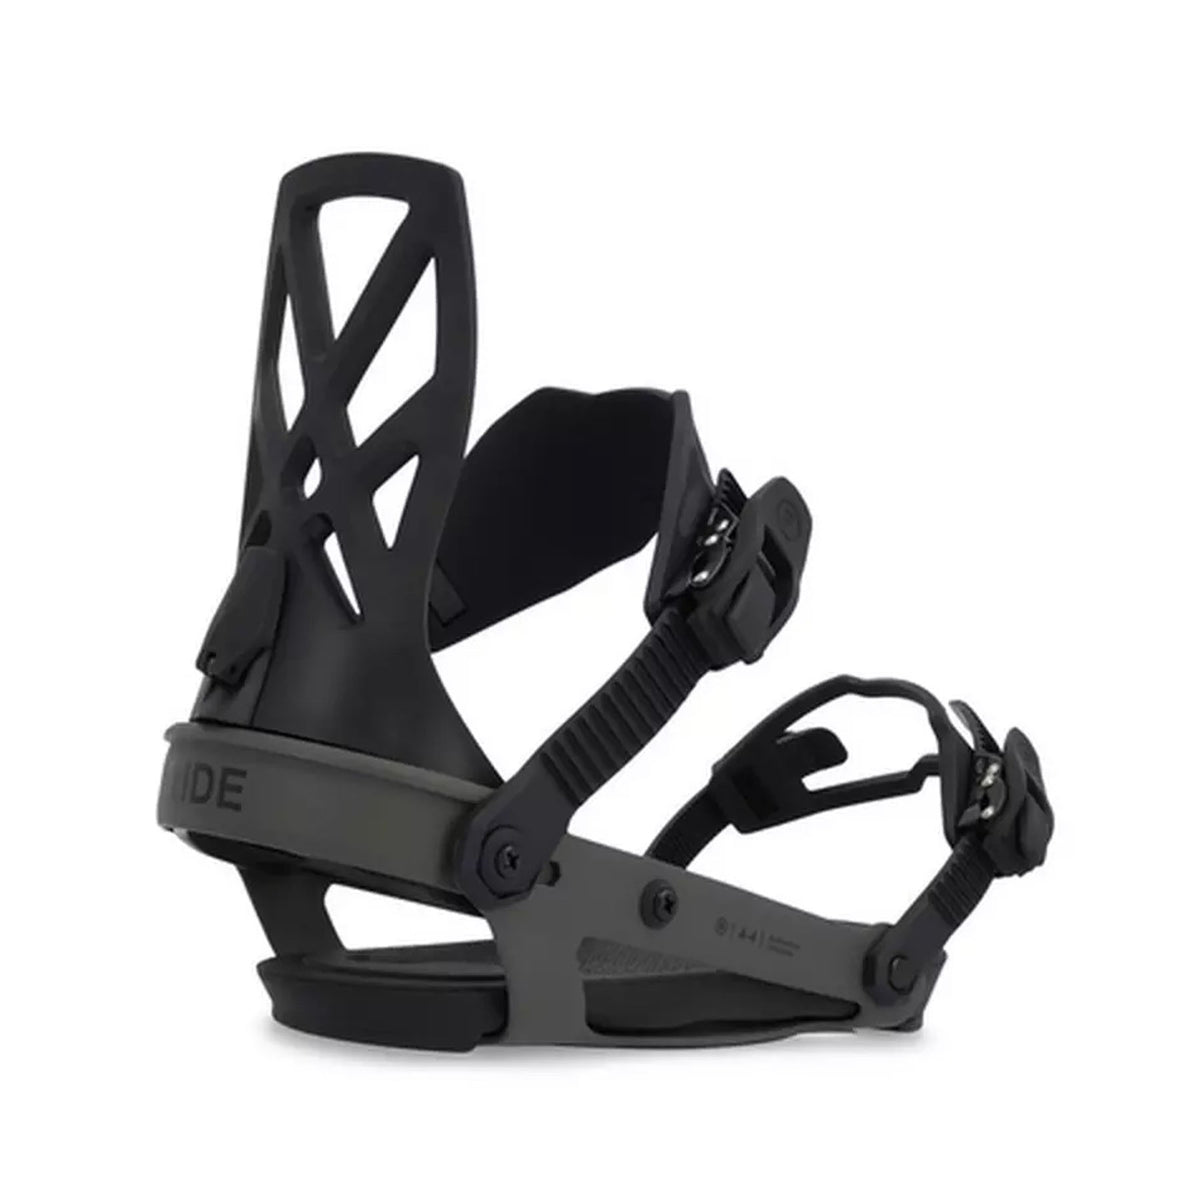 Hero image of the Ride A4 binding in black.